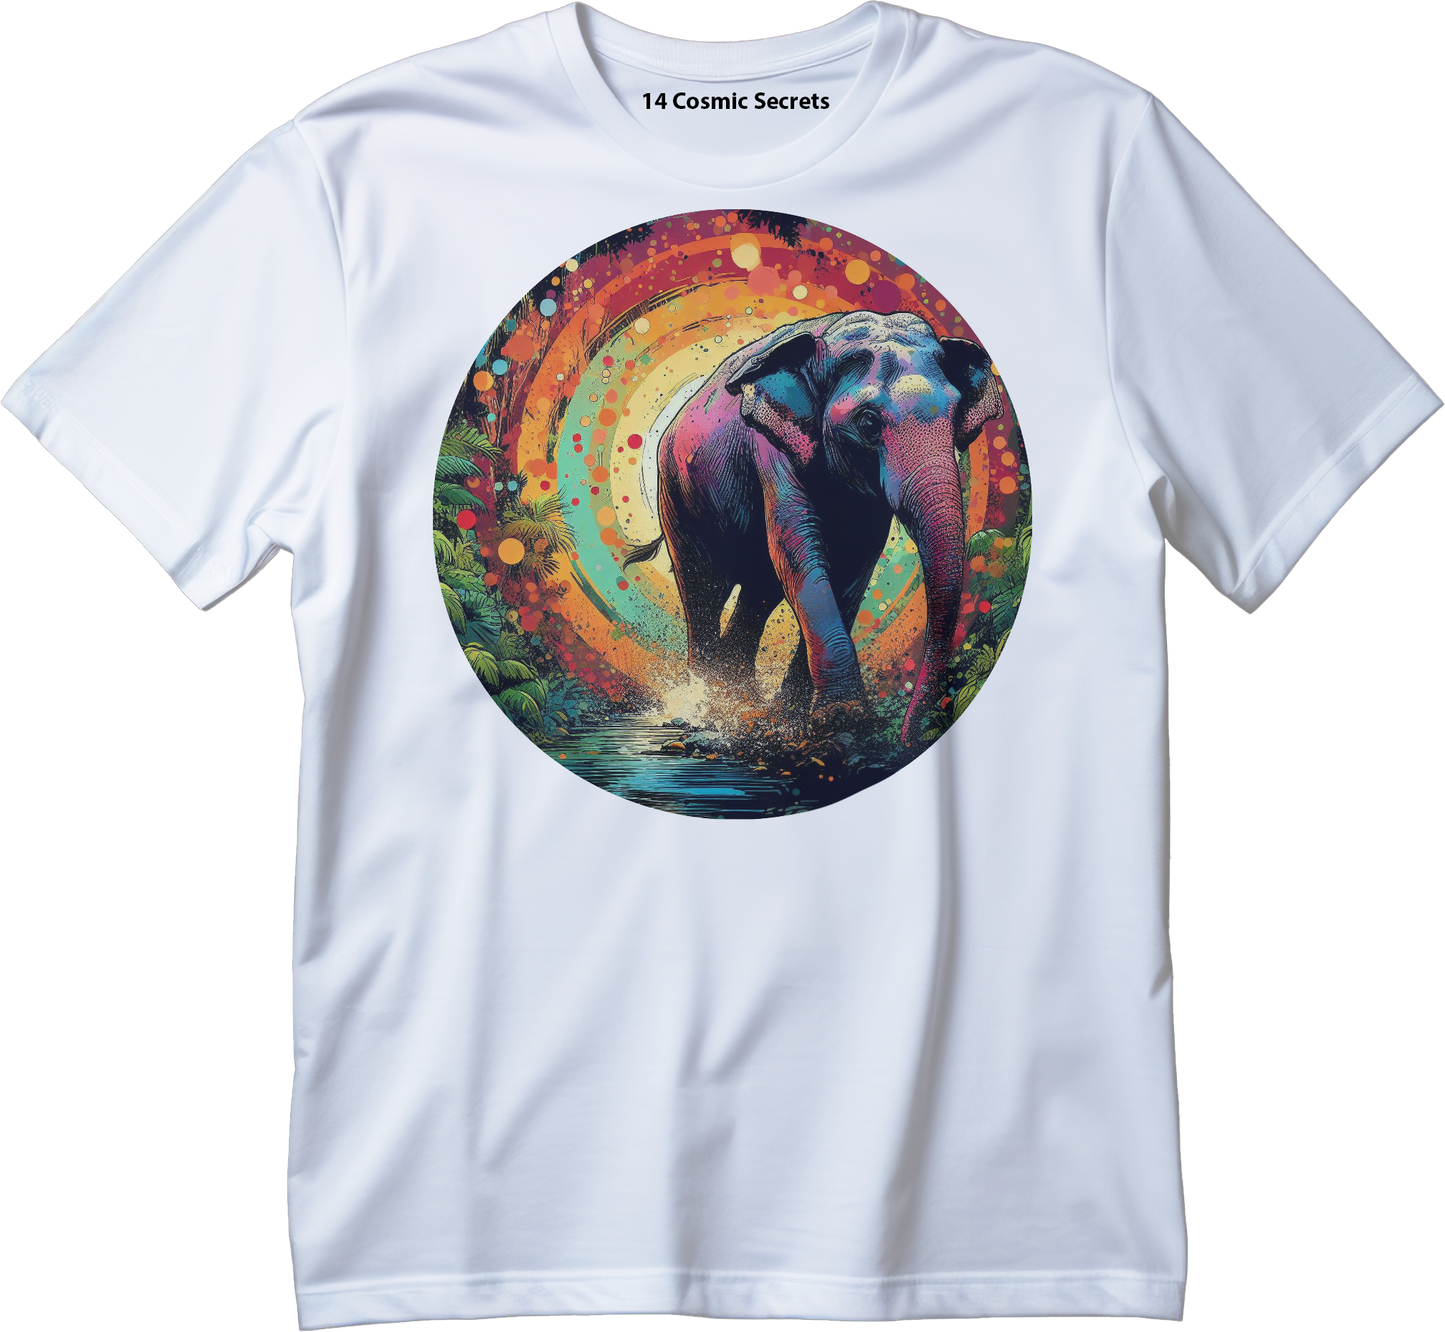 Celebrate the Indian Elephant  Graphic Printed T-Shirt  Cotton T-Shirt Magnificence of India T-Shirt